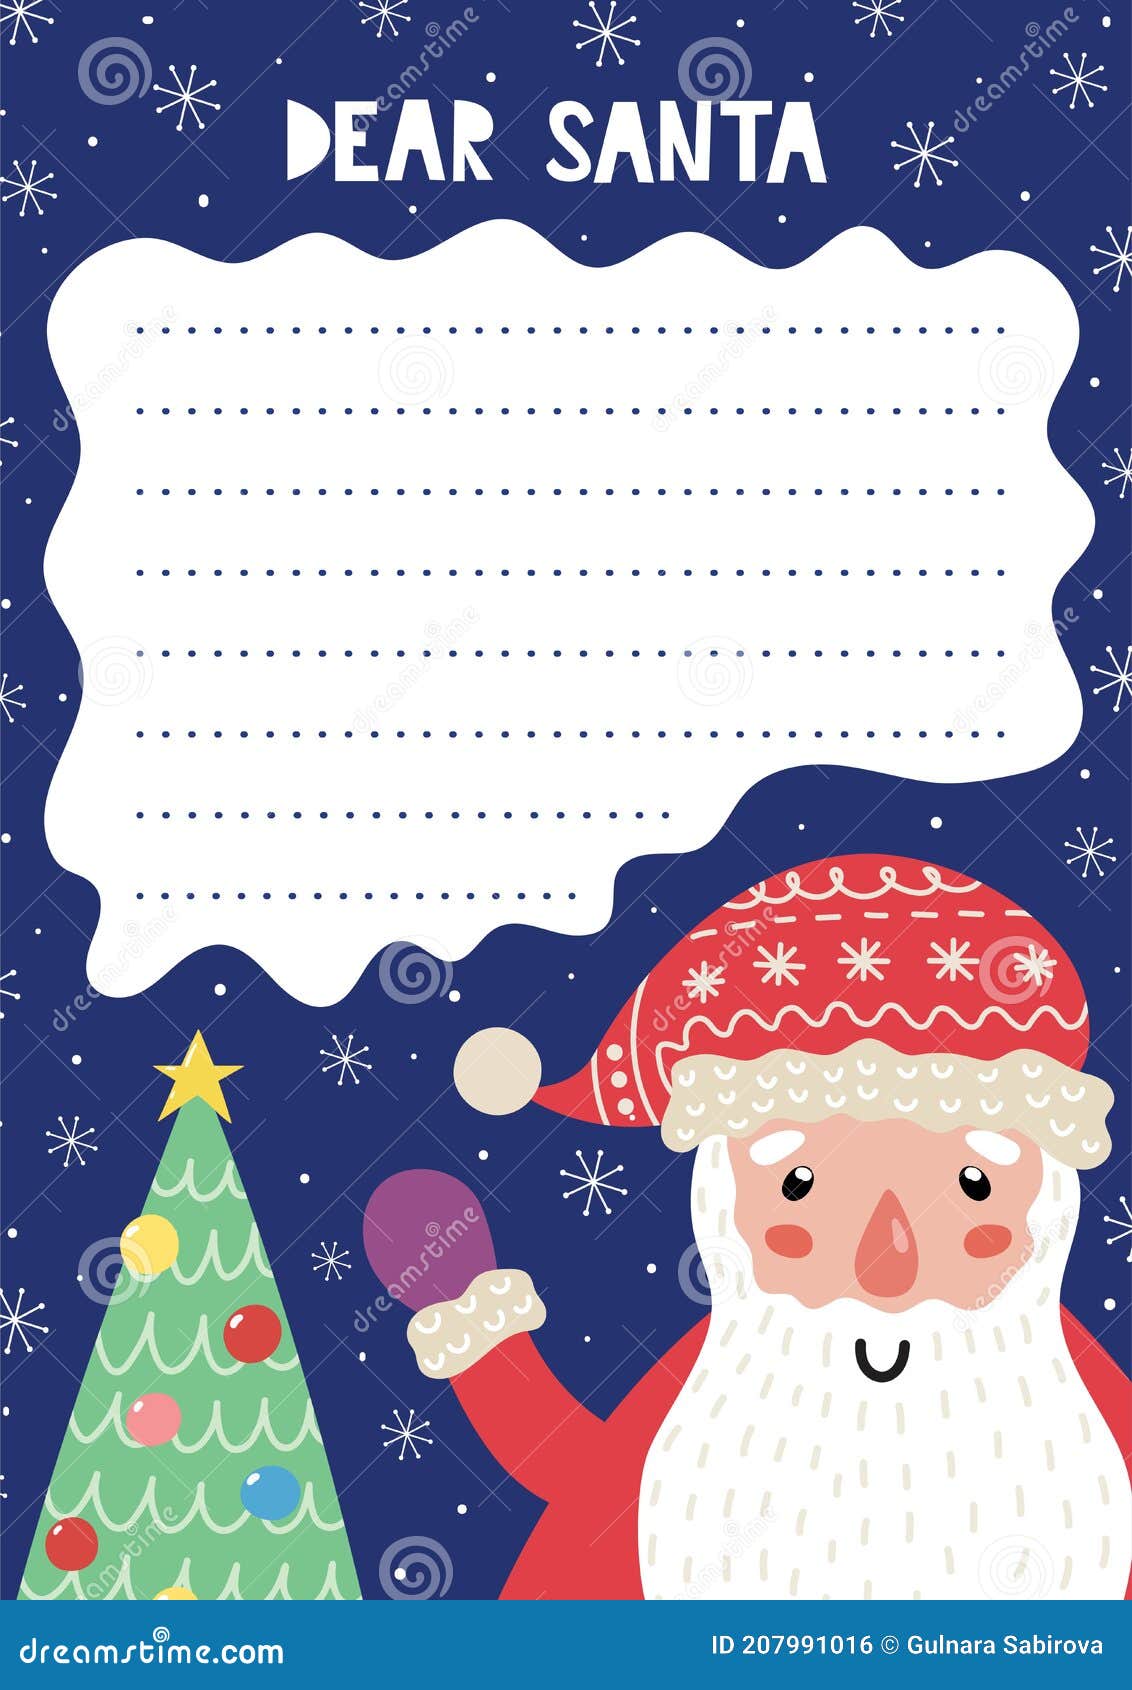 Letter To Santa Claus Template with a Funny Winter Character and a Tree.  Christmas Wish List A4 Stock Vector - Illustration of kids, winter:  207991016